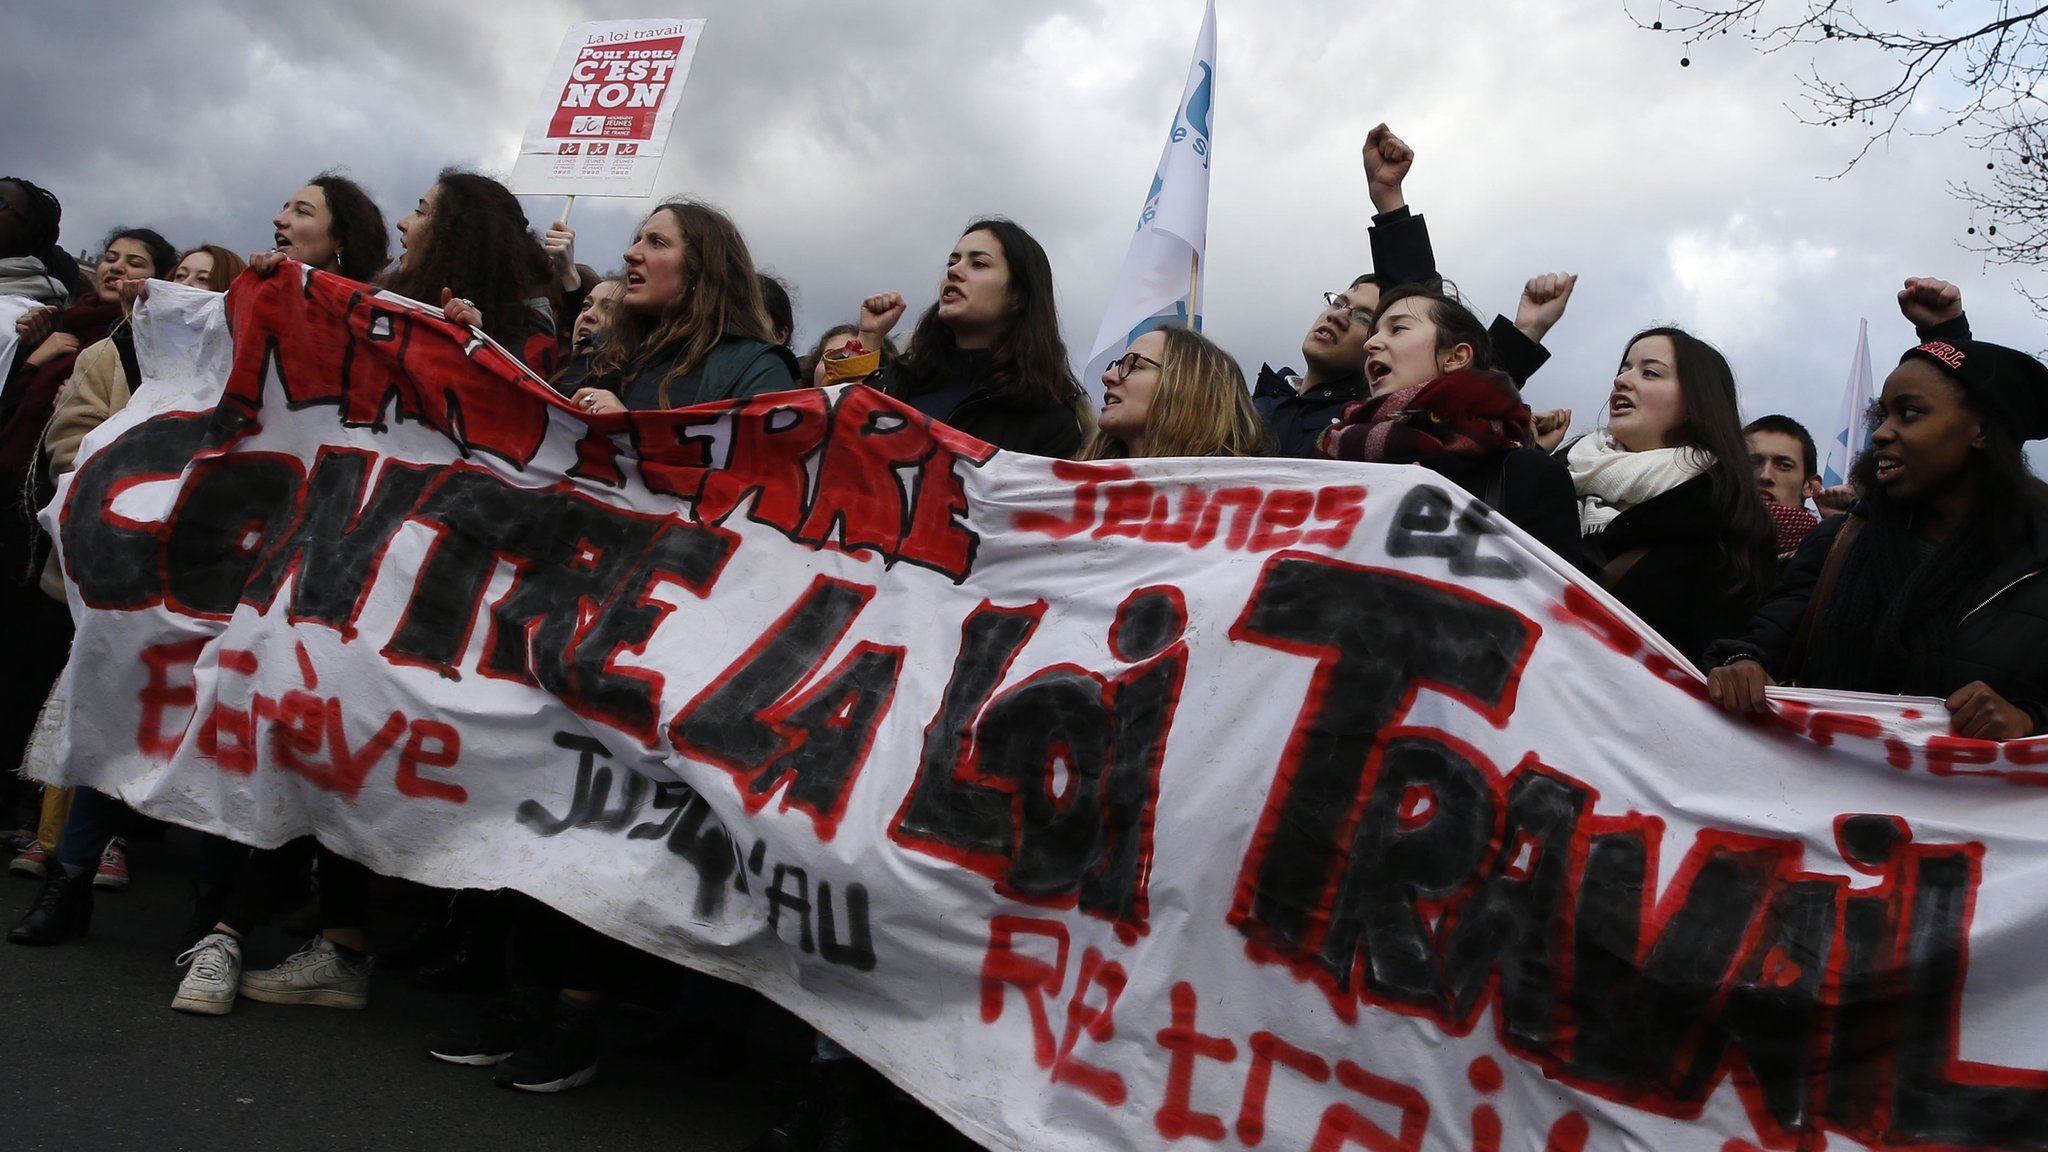 Protesters hold a banner reading "Against the labour law, strike until withdrawal" as they take part in a demonstration on 9 March 2016, in Paris, during a nationwide day of protest against proposed labour reforms